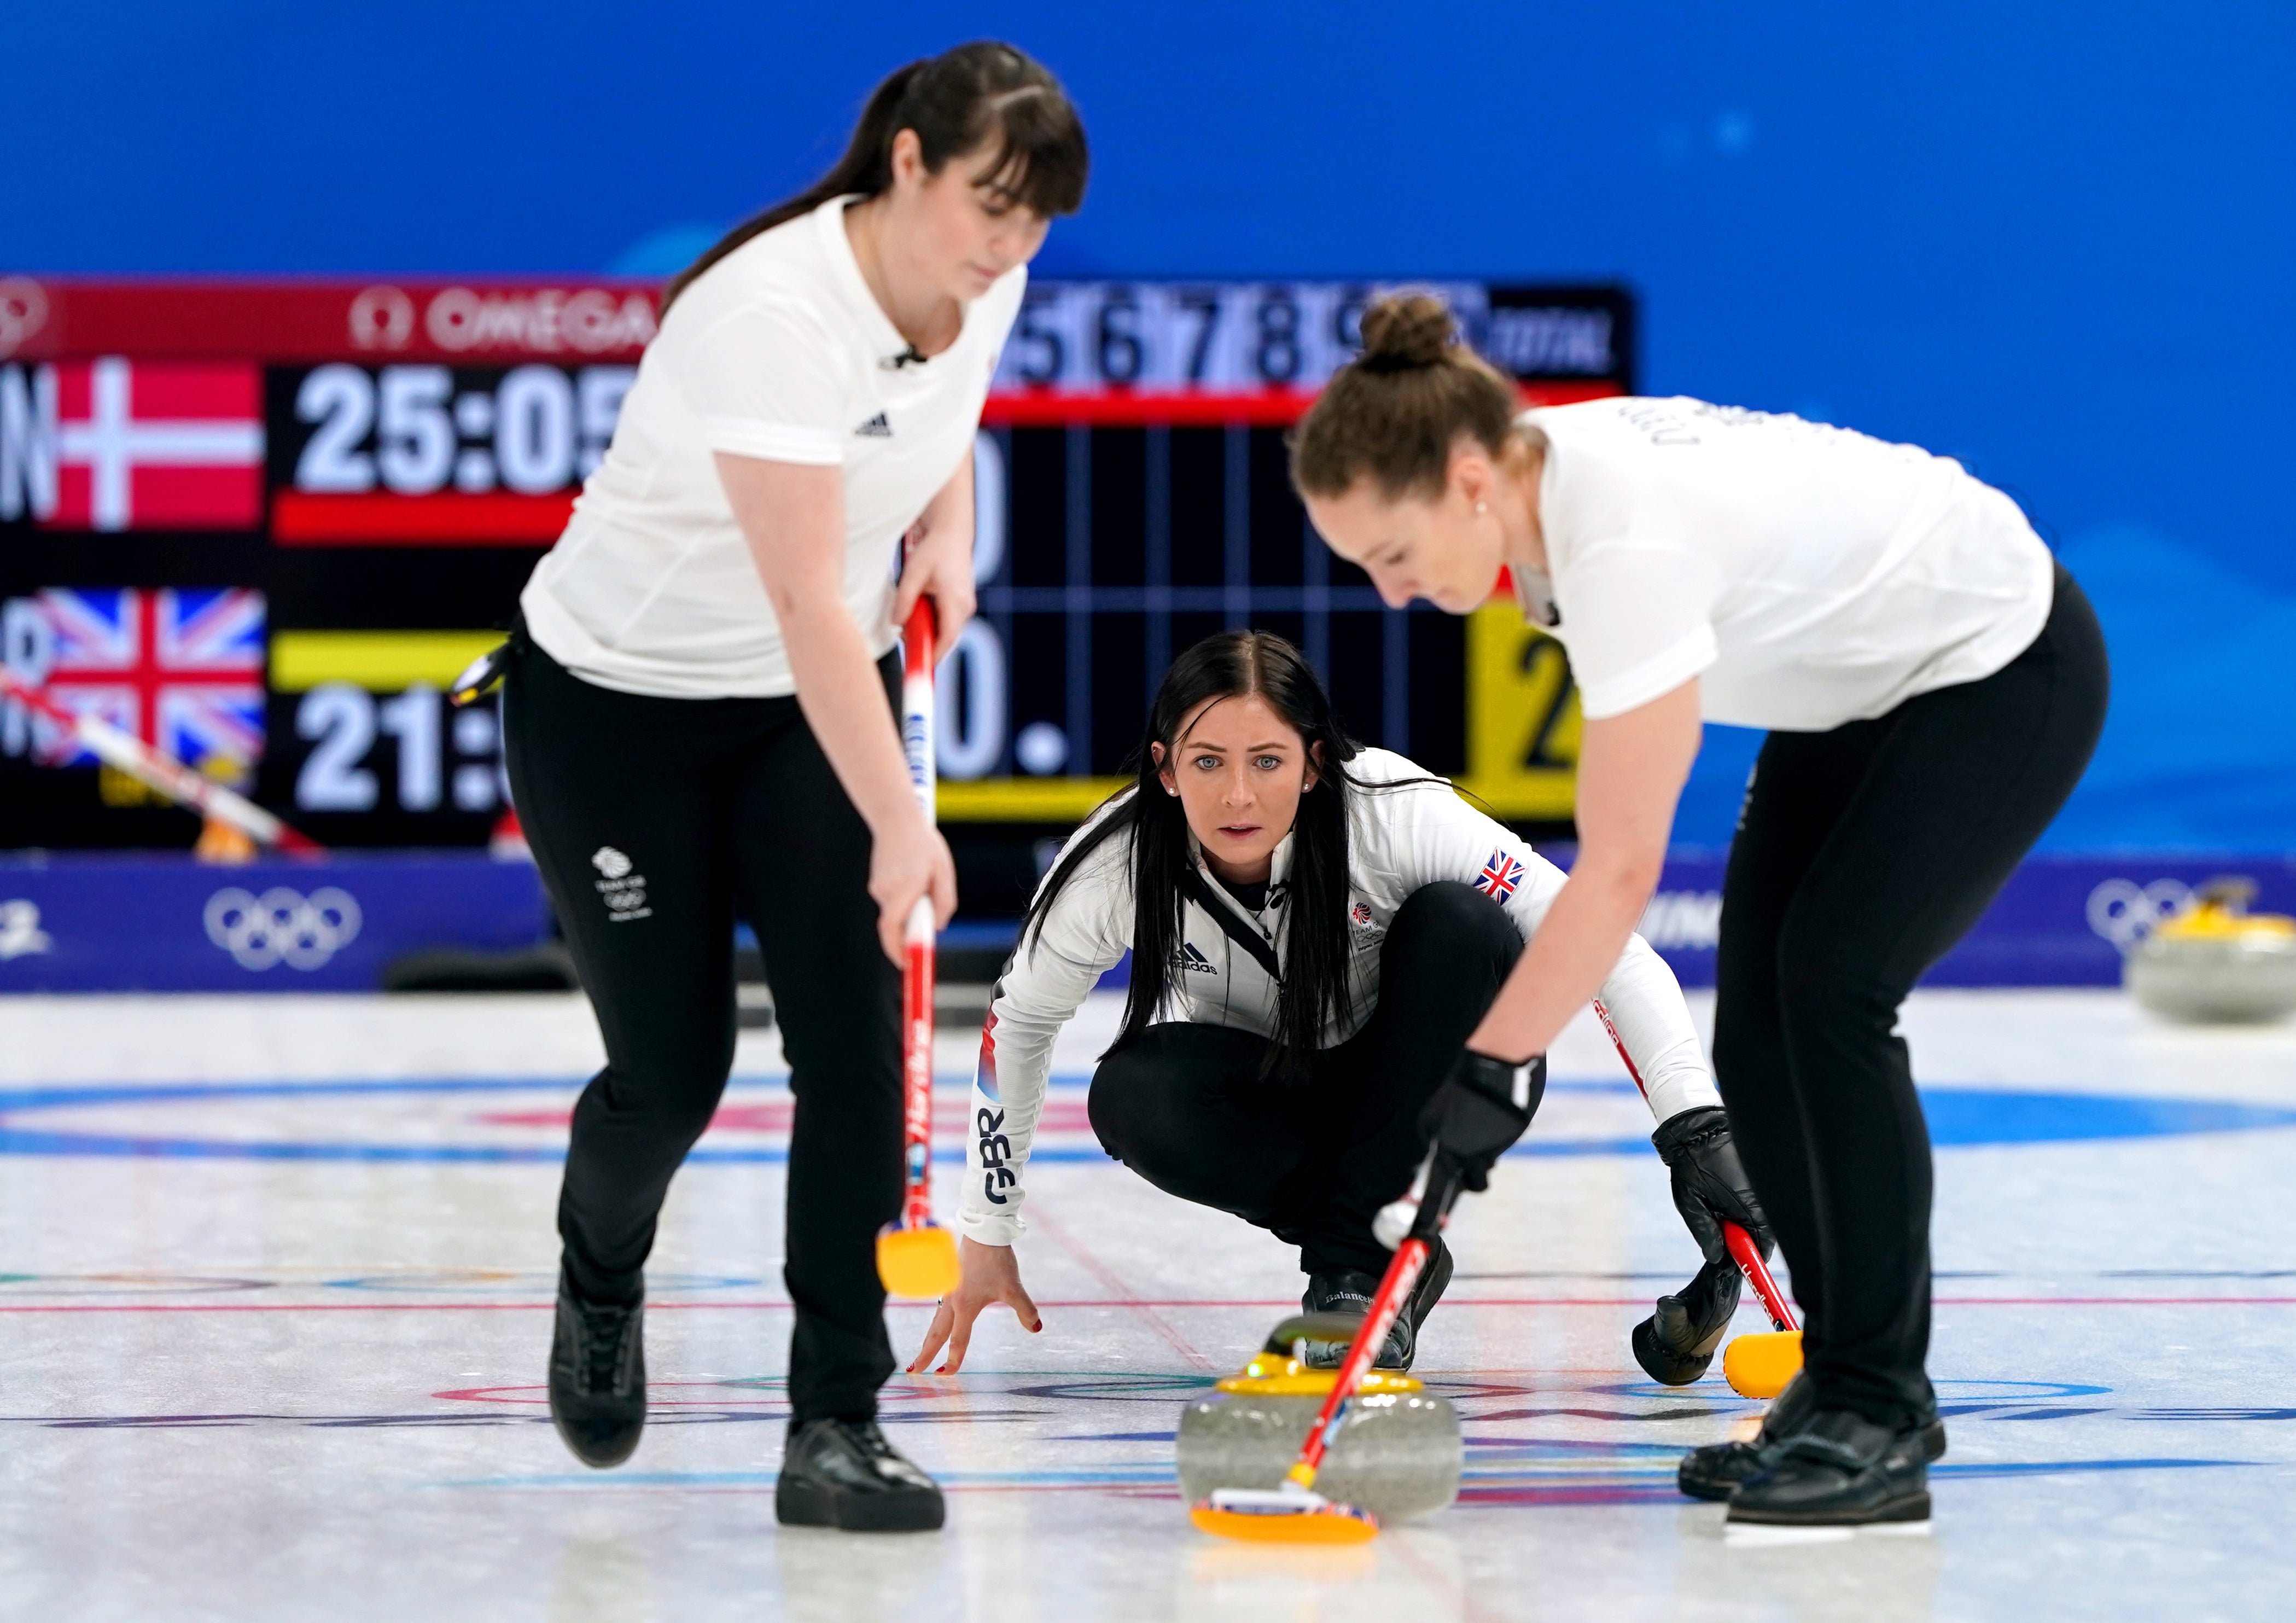 Eve Muirhead’s team scored a second straight win in Beijing (Andrew Milligan/PA)